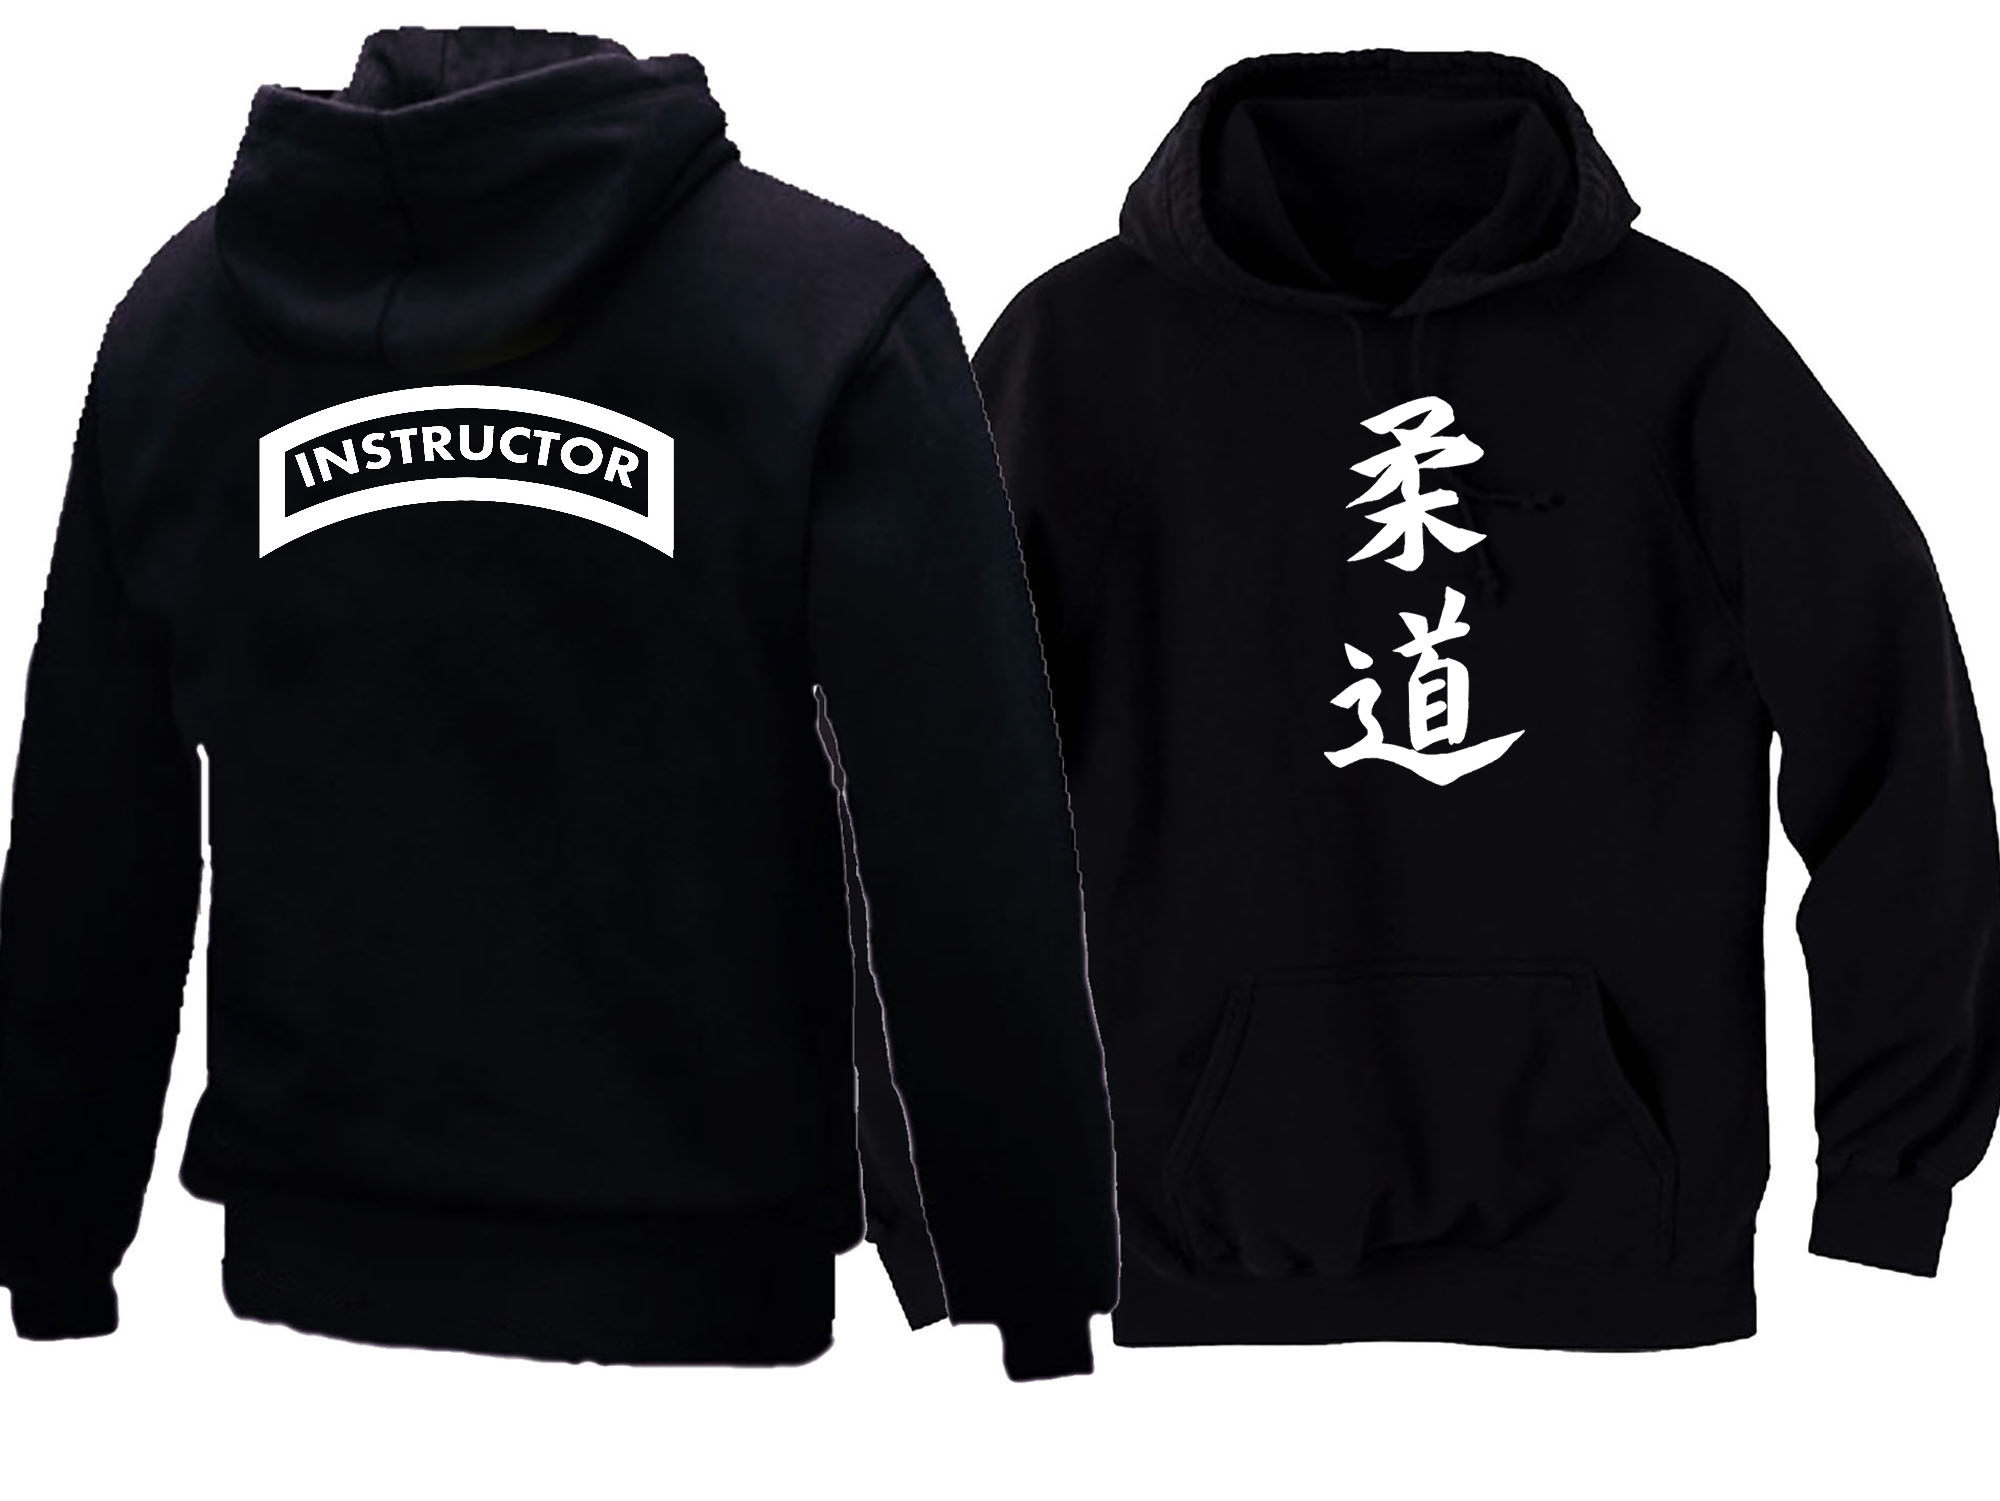 Judo Instructor w Kanji writing pullover hoodie front & back image